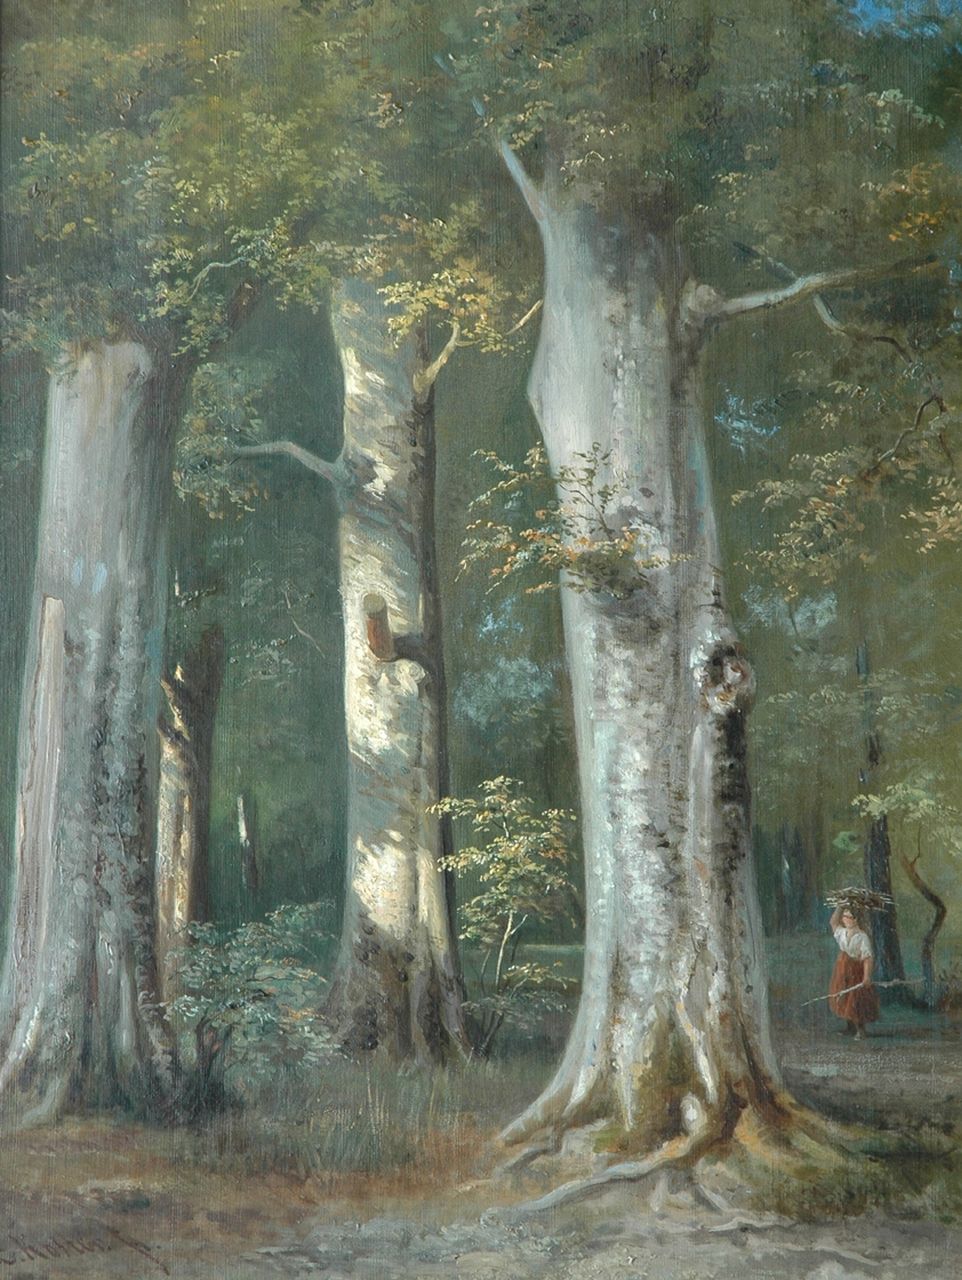 Koster E.  | Everhardus Koster, A country girl in the forest, oil on canvas 67.4 x 53.0 cm, signed l.l.